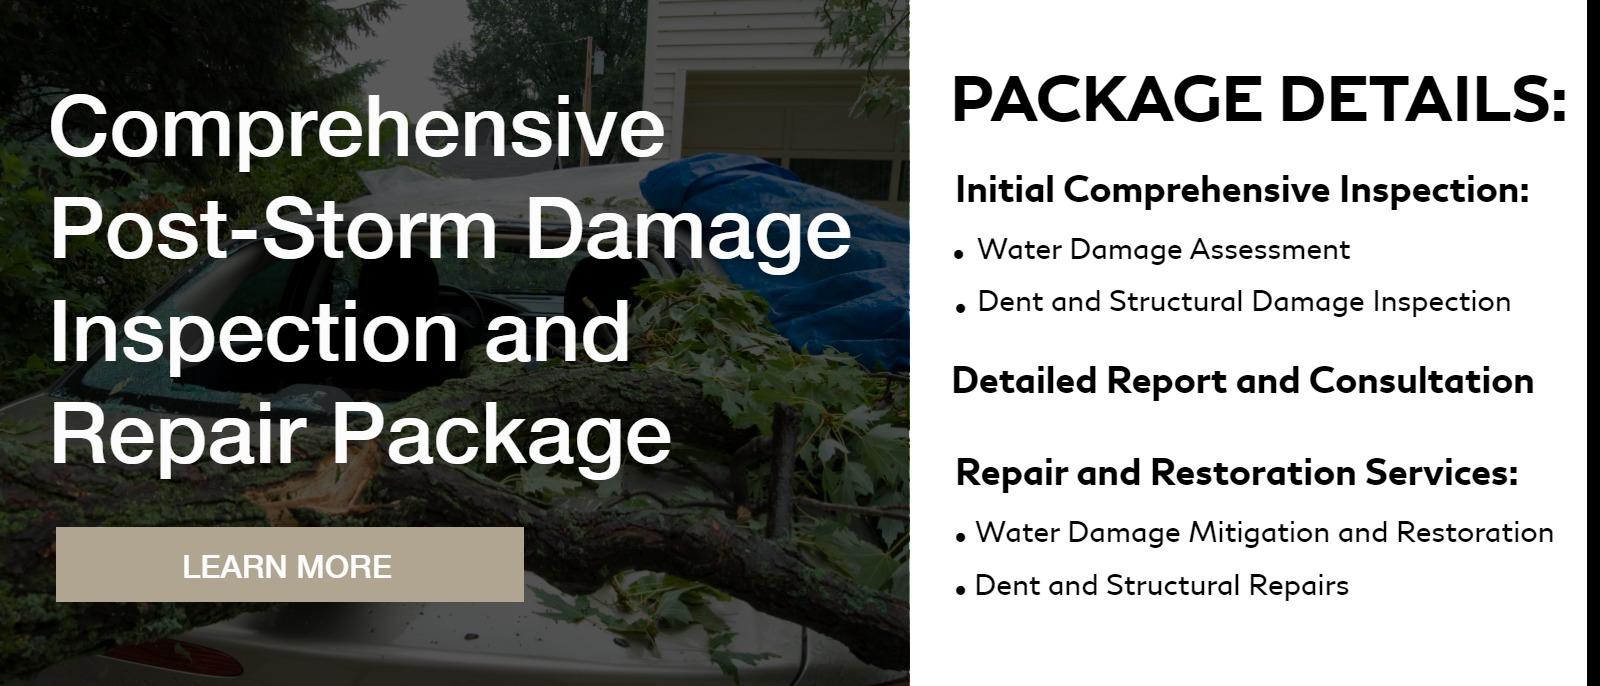 Comprehensive Post-Storm Damage Inspection and Repair Package
Package Details
Initial Comprehensive Inspection:
Water Damage Assessment:
Dent and Structural Damage Inspection:

Detailed Report and Consultation:
Repair and Restoration Services:
1. Water Damage Mitigation and Restoration
2. Dent and Structural Repairs